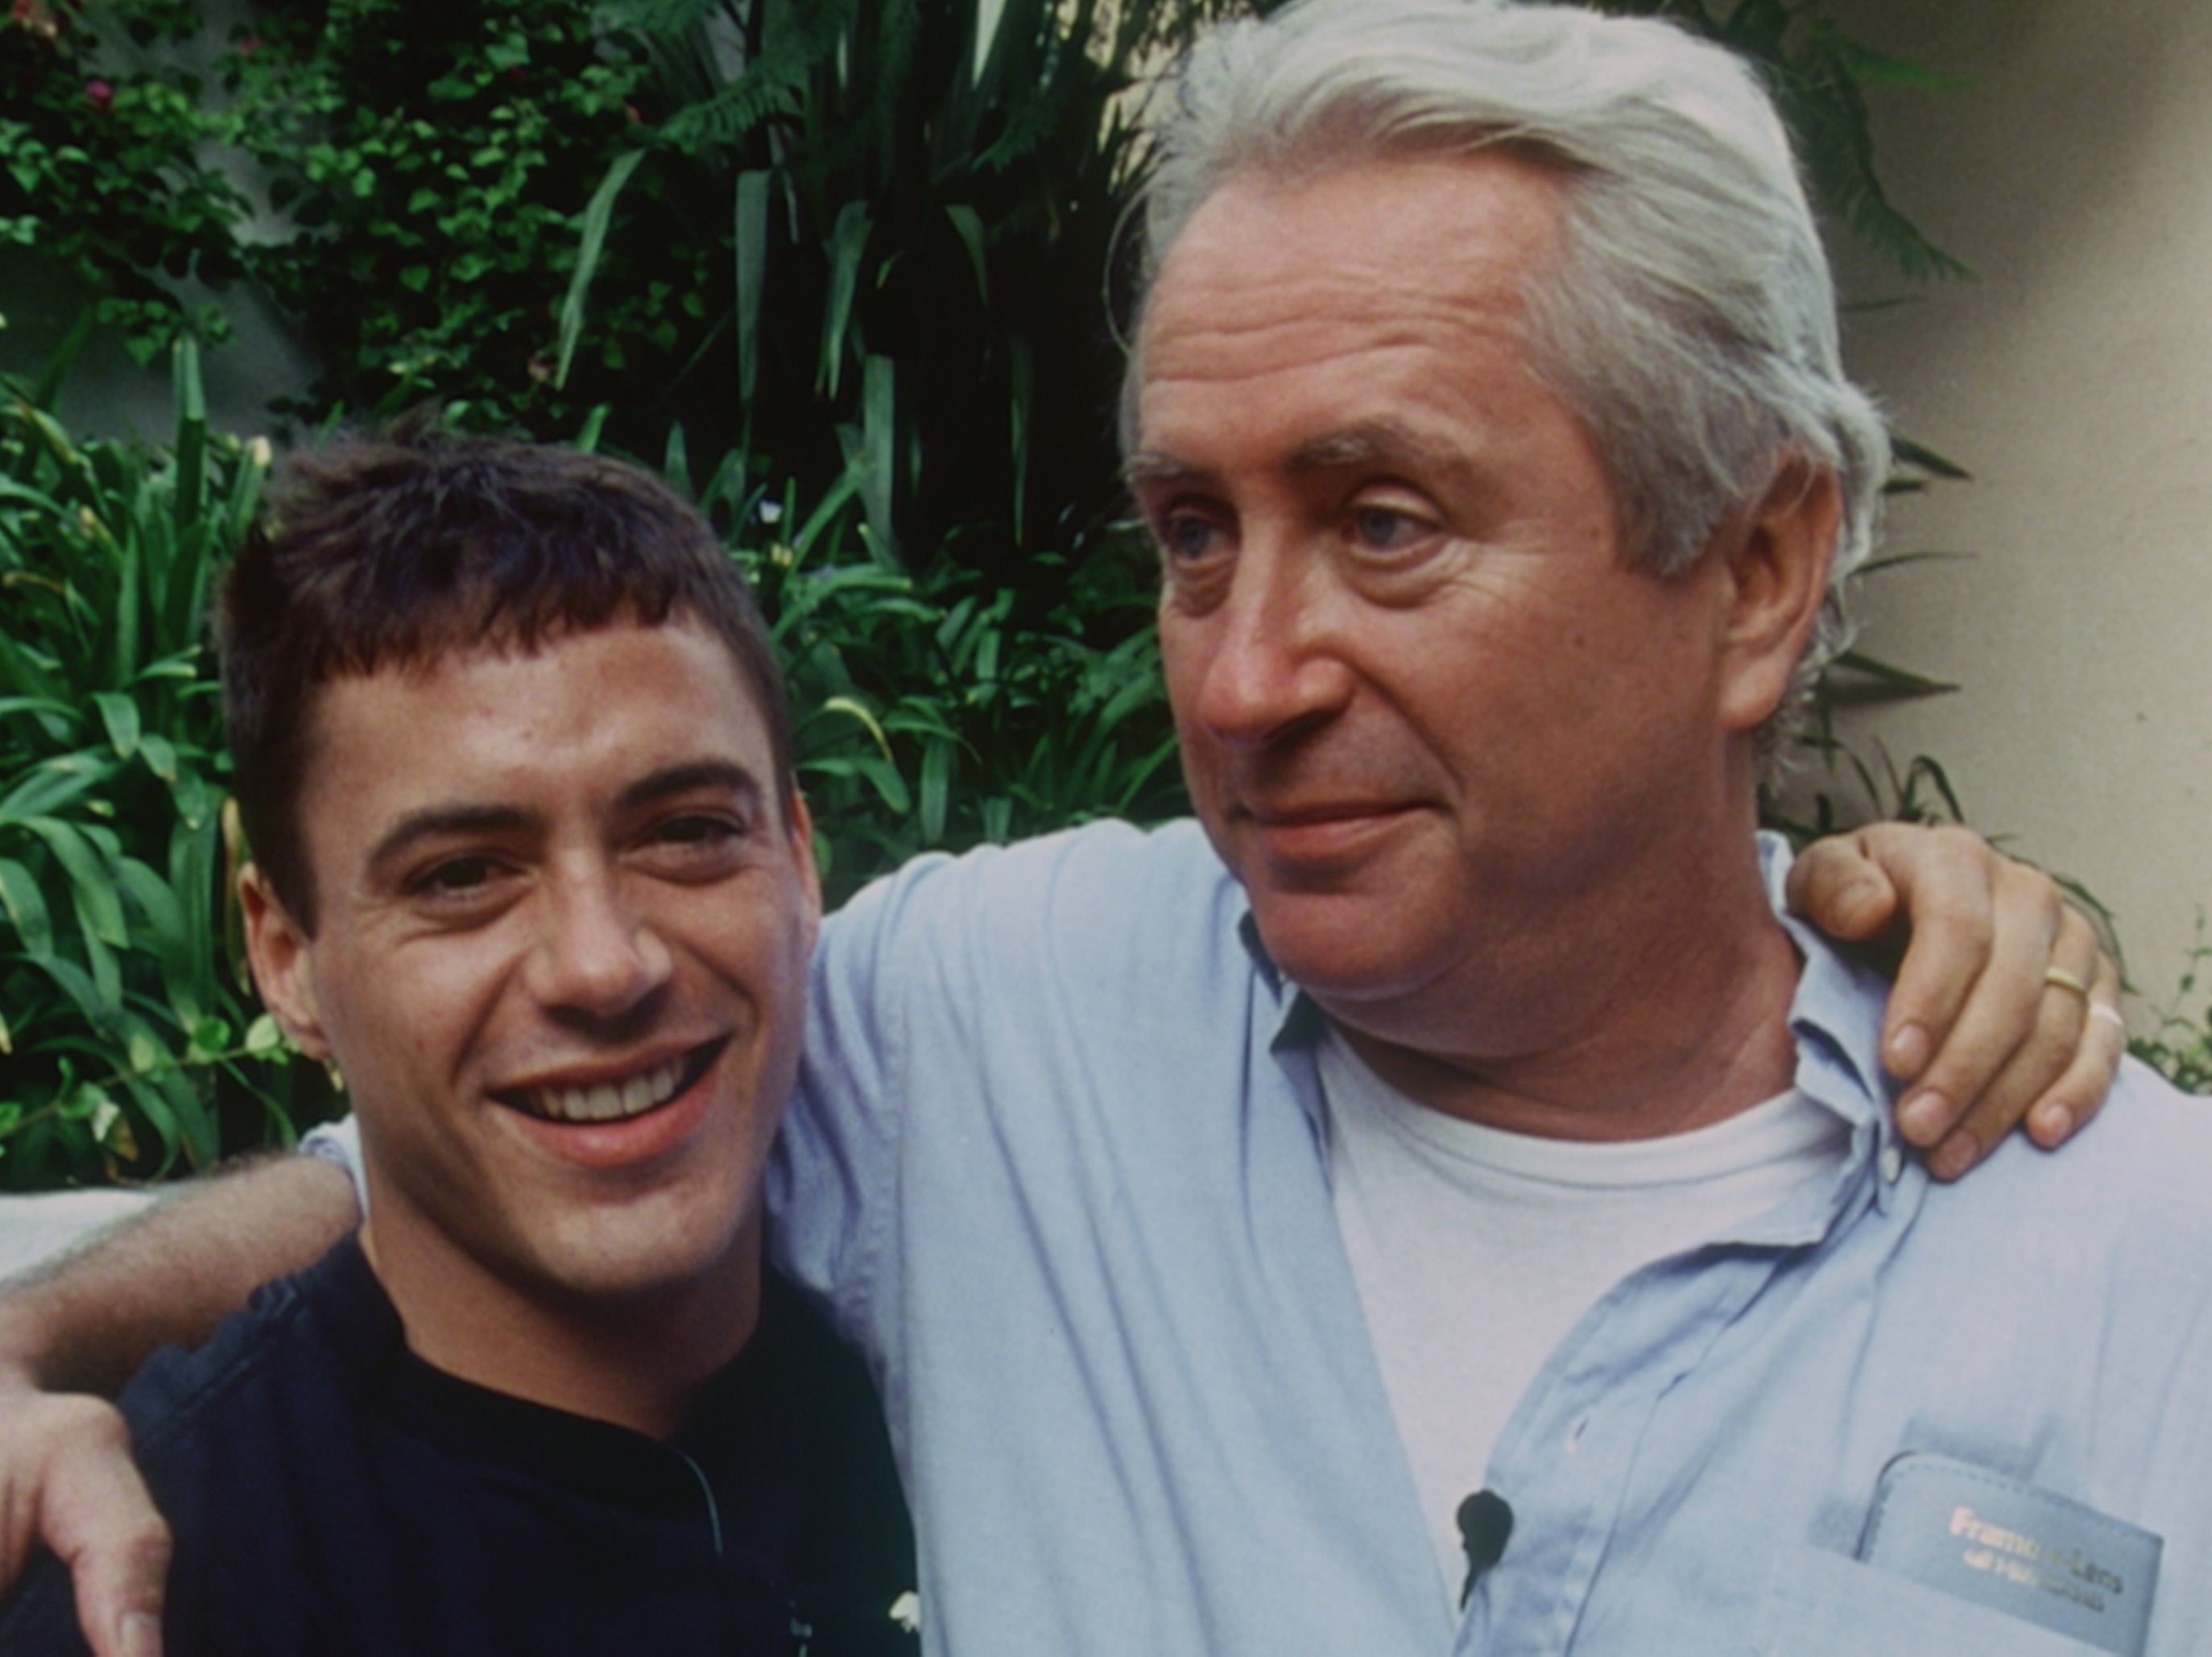 Robert Downey Sr's life of drugs, taboo-busting films and parental regrets